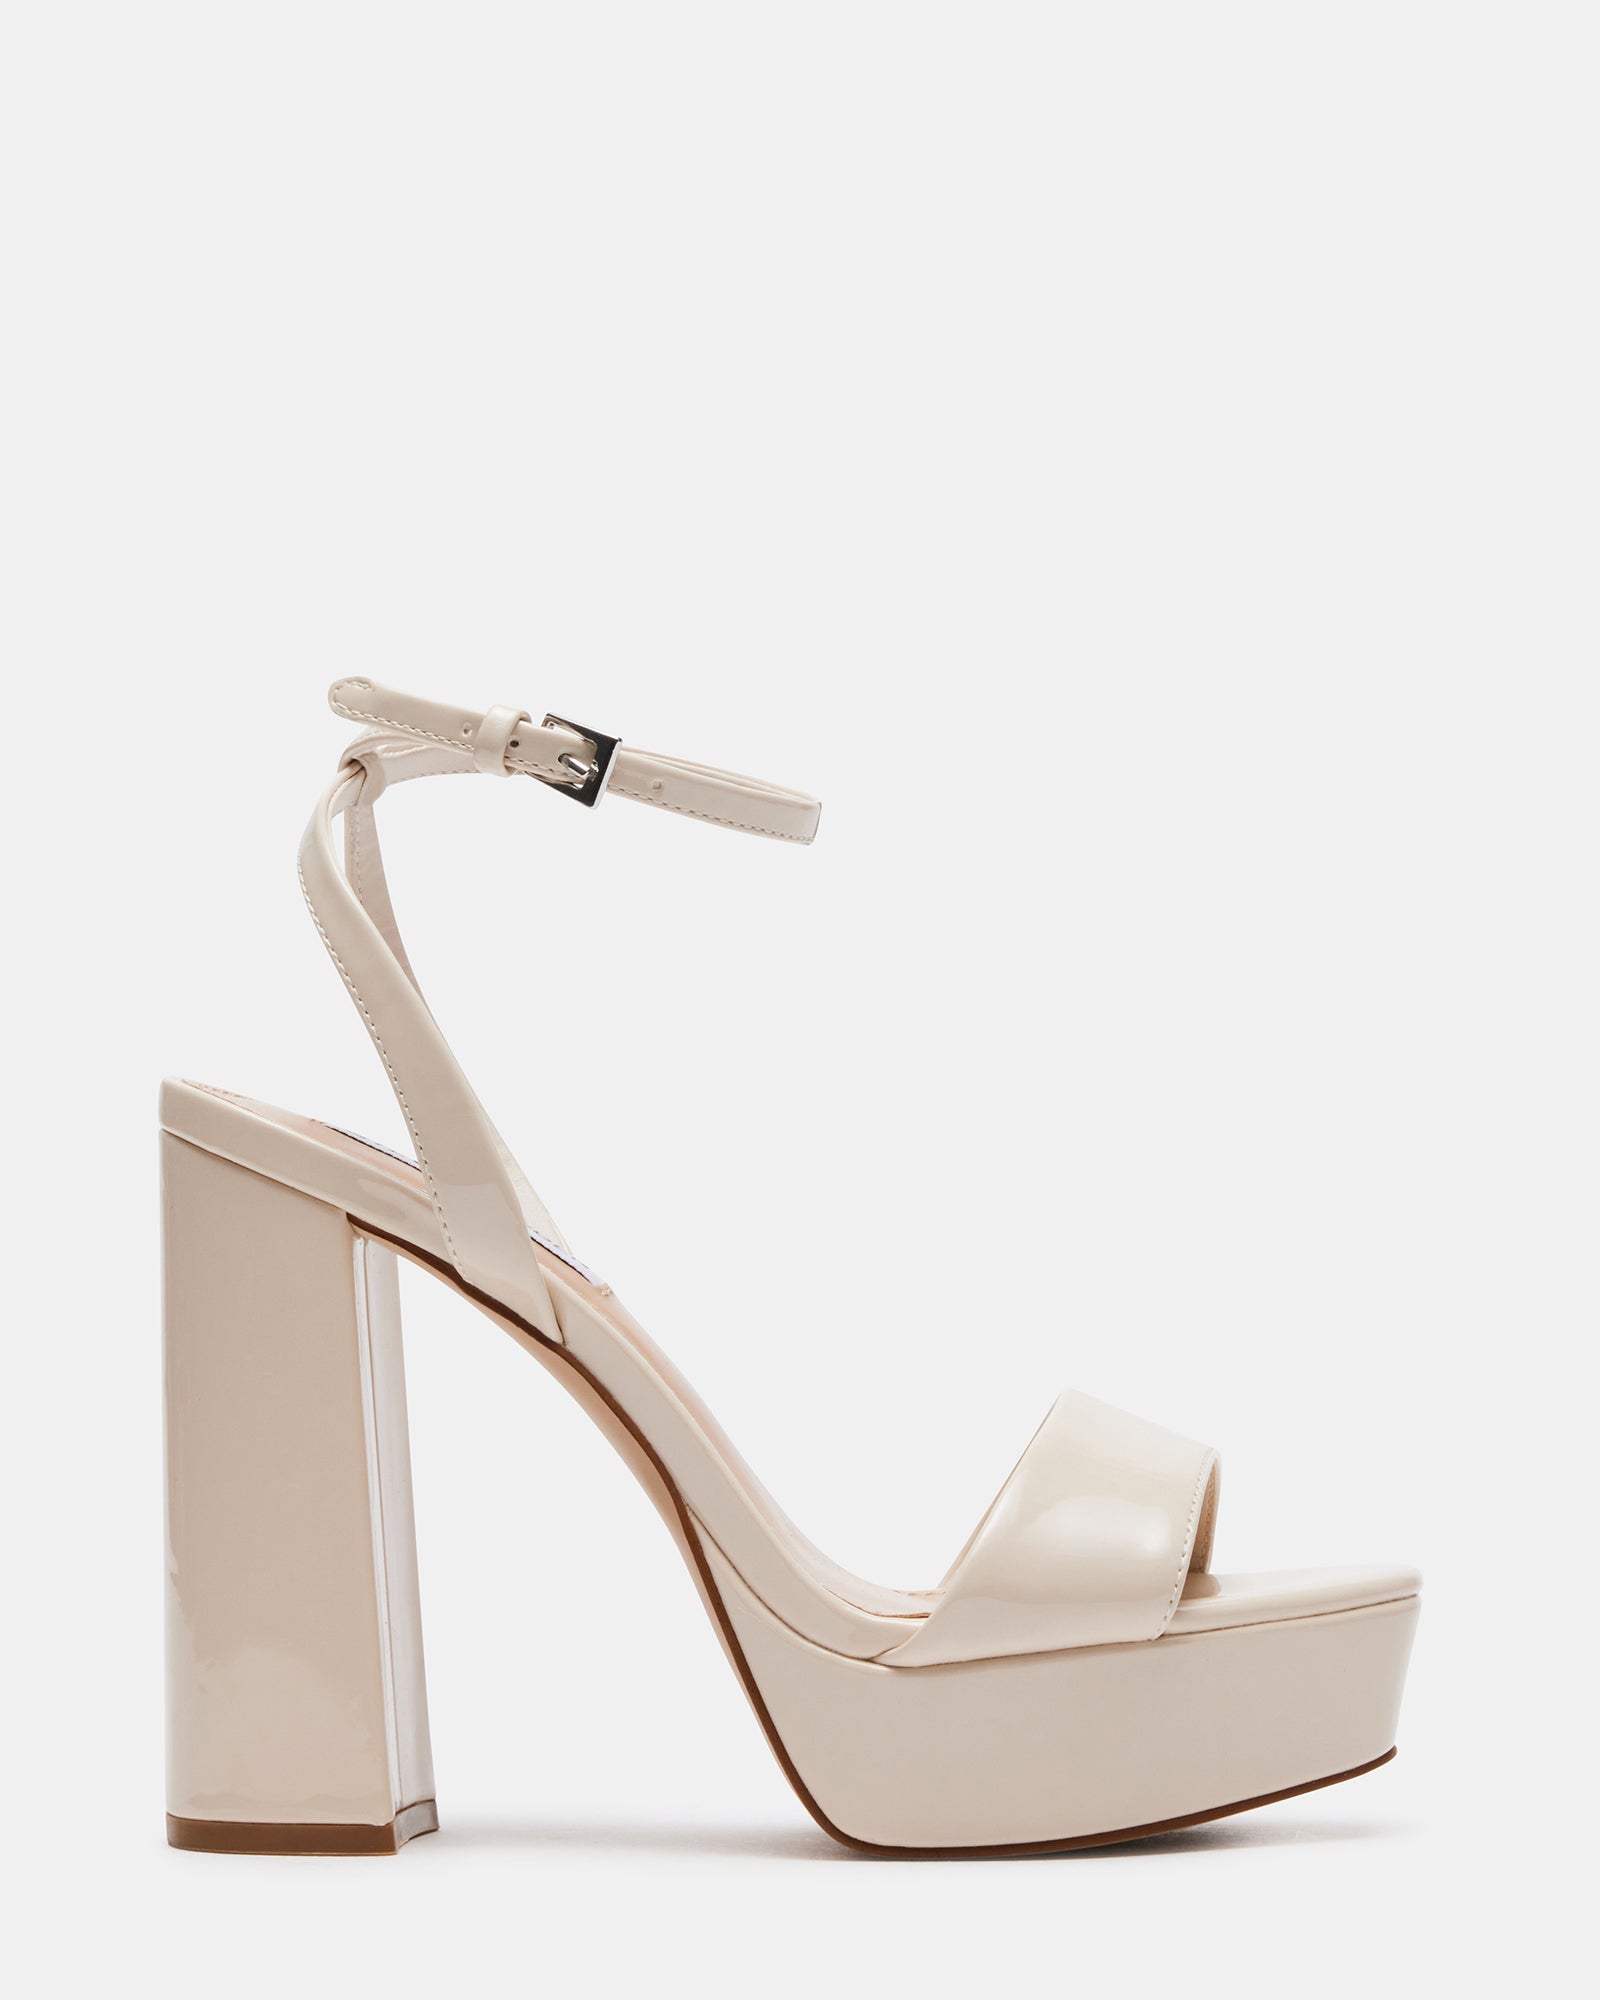 Steve Madden Shoes | Submit Black Wedge Sandals | Style Representative